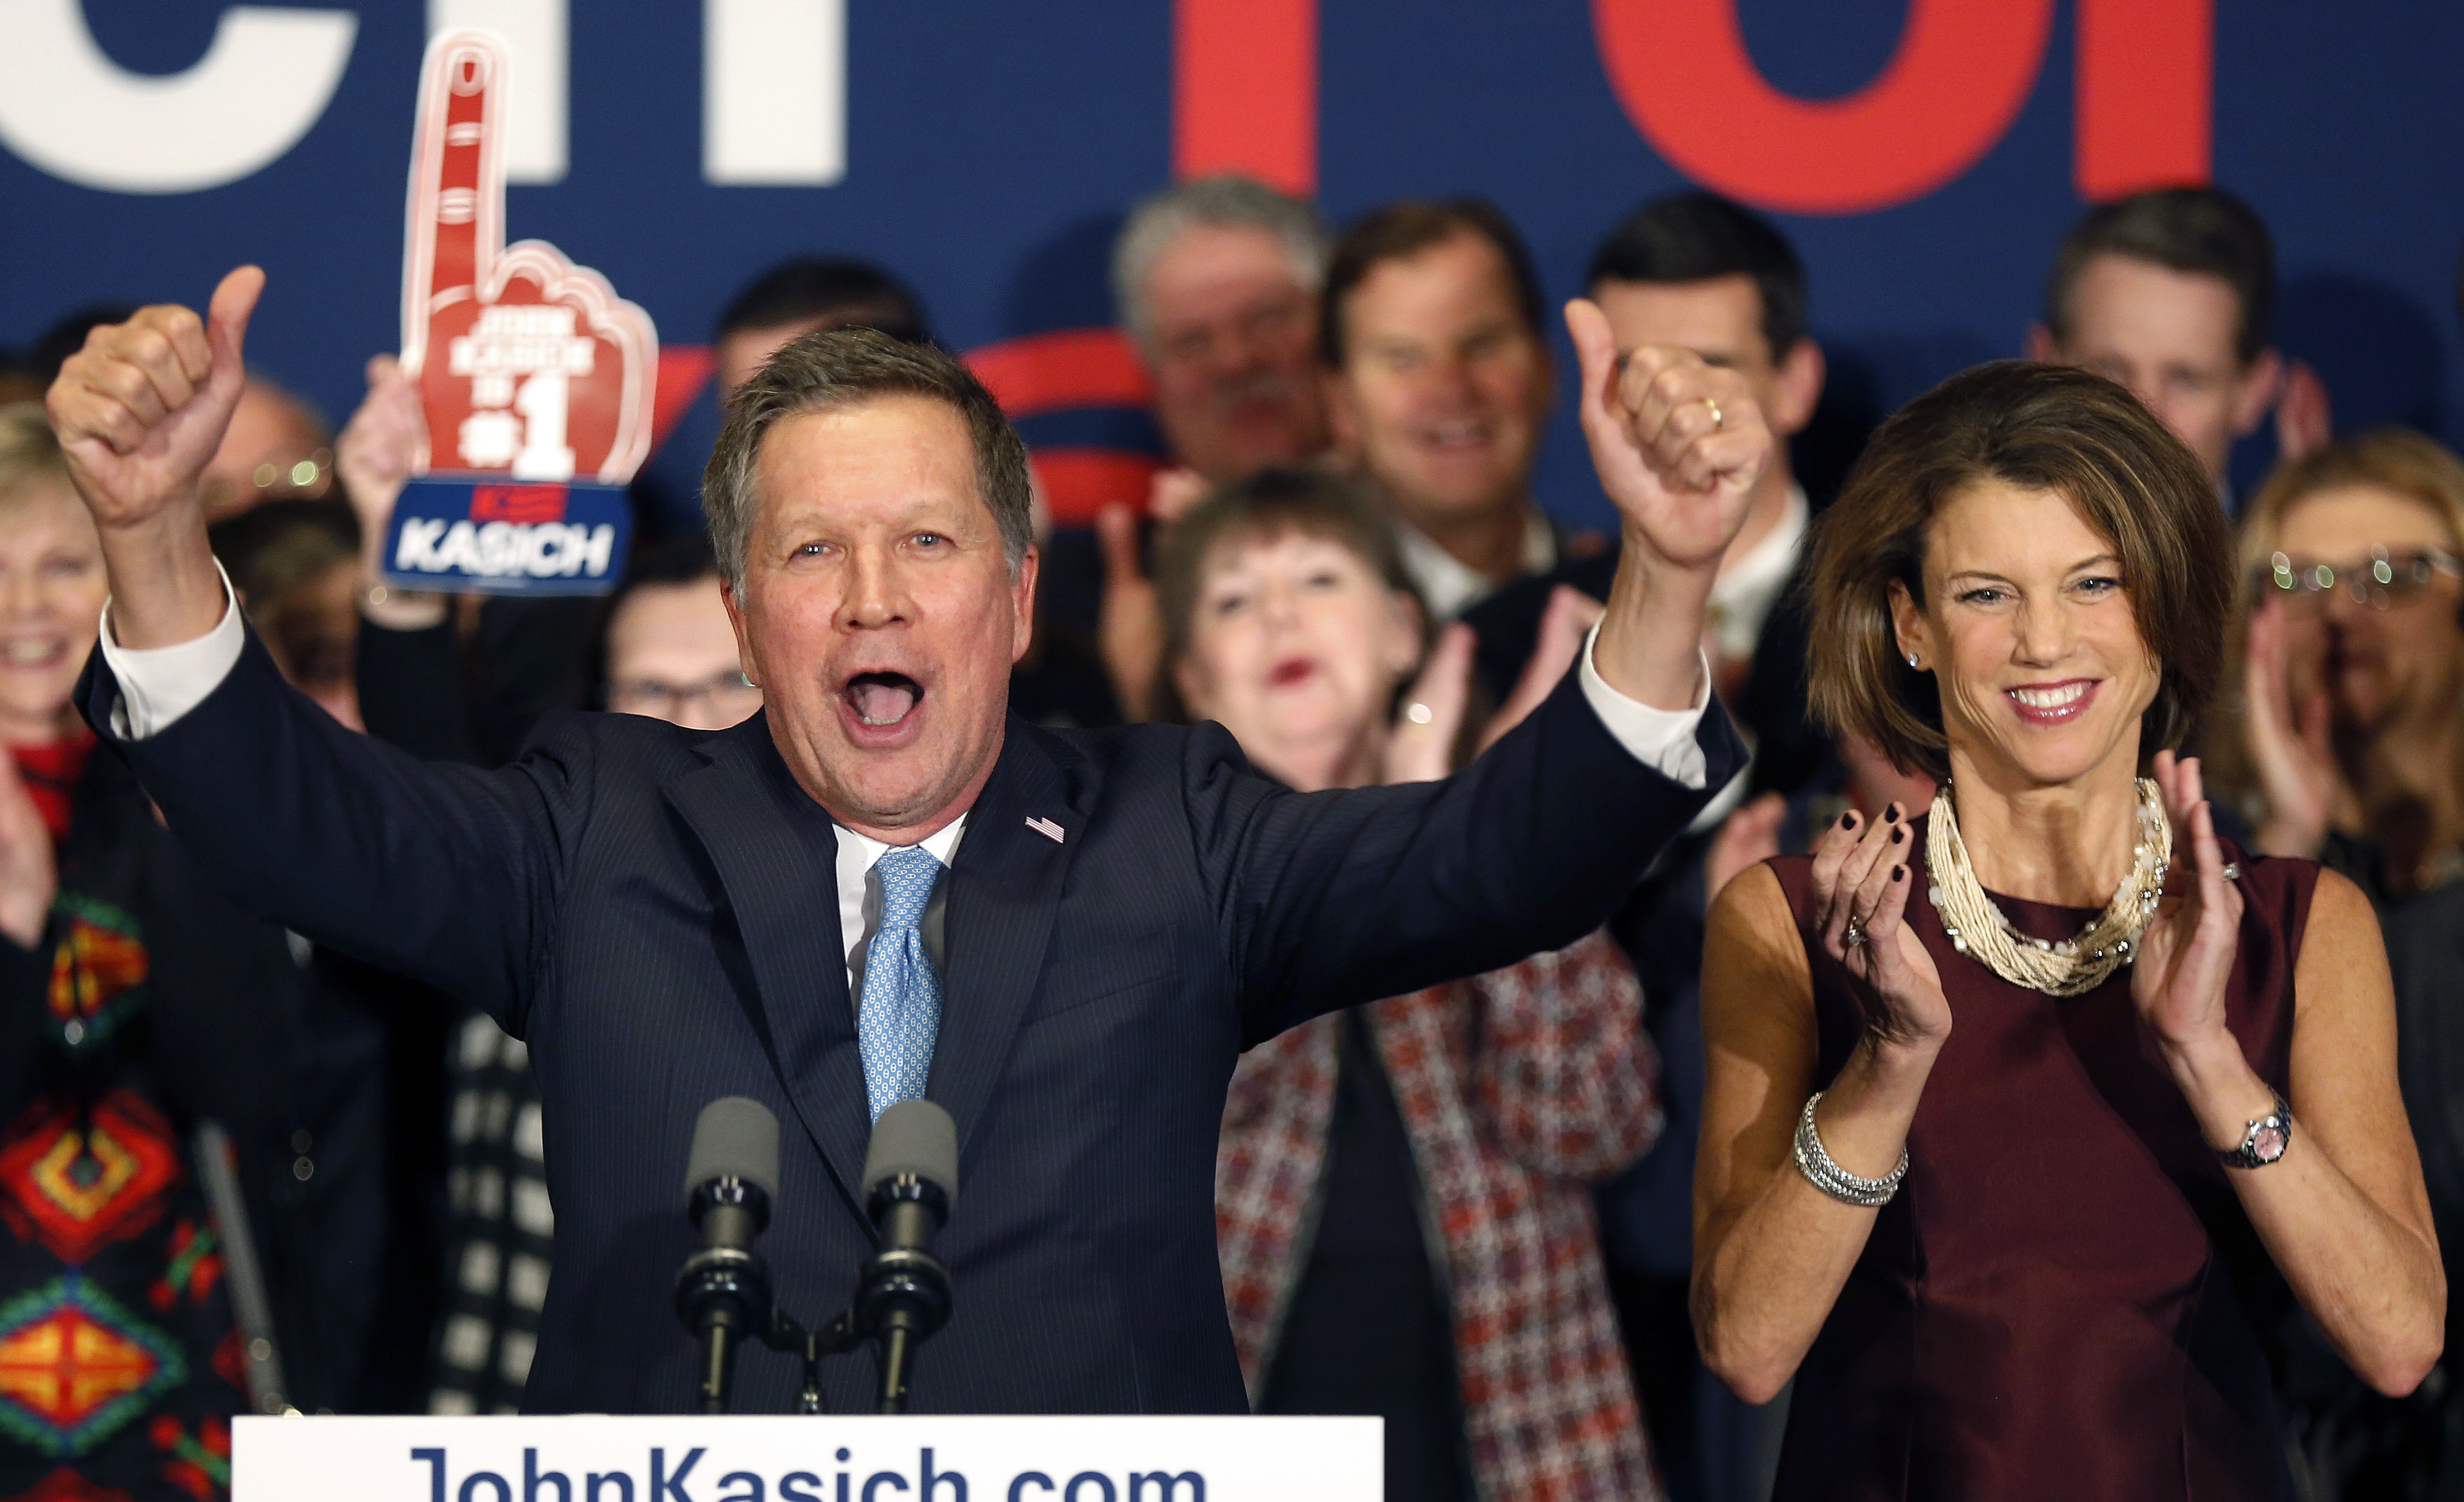 John Kasich coming up from behind.